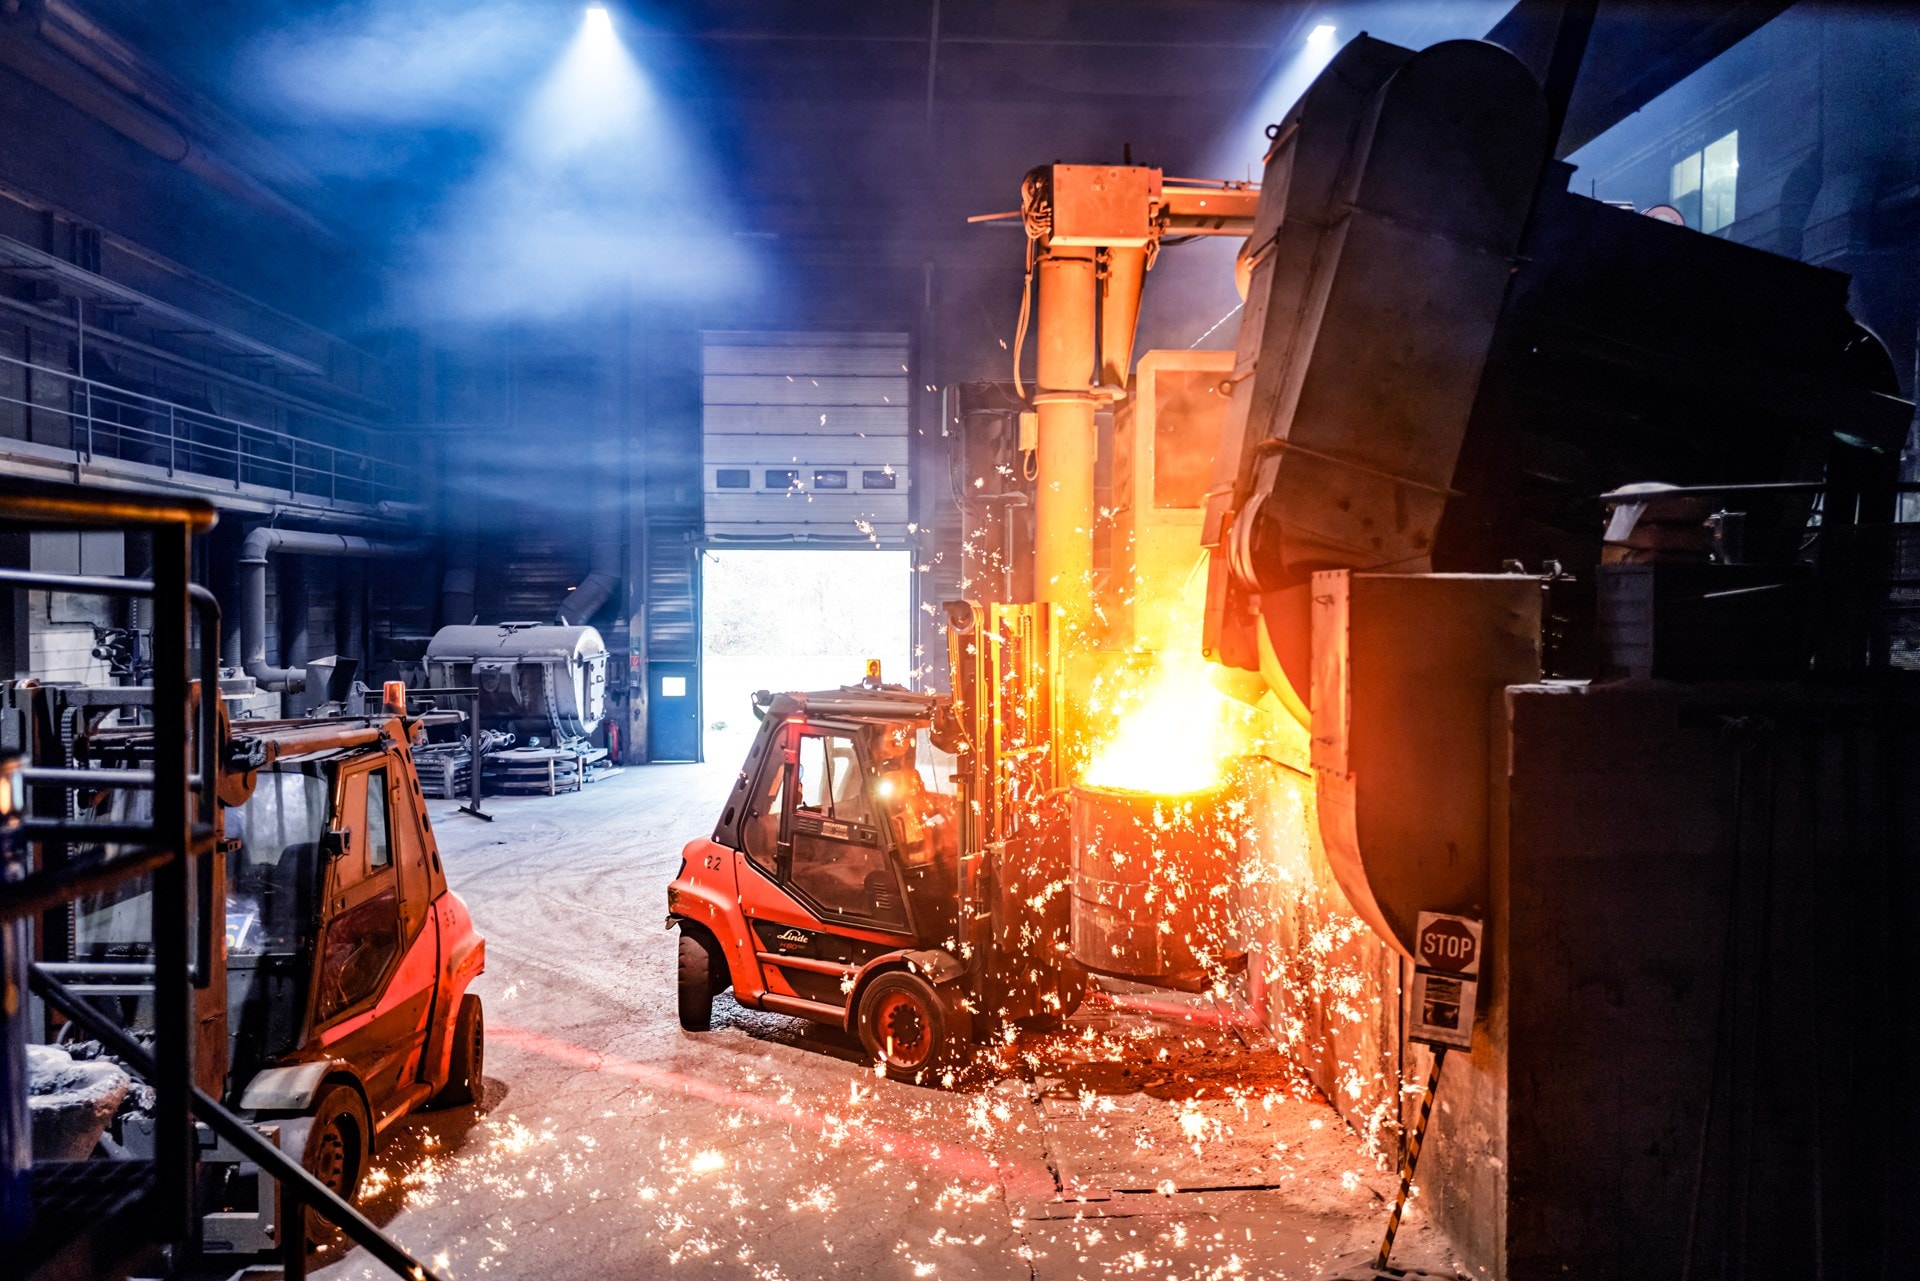 A forklift transports a barrel of molten iron through a foundry